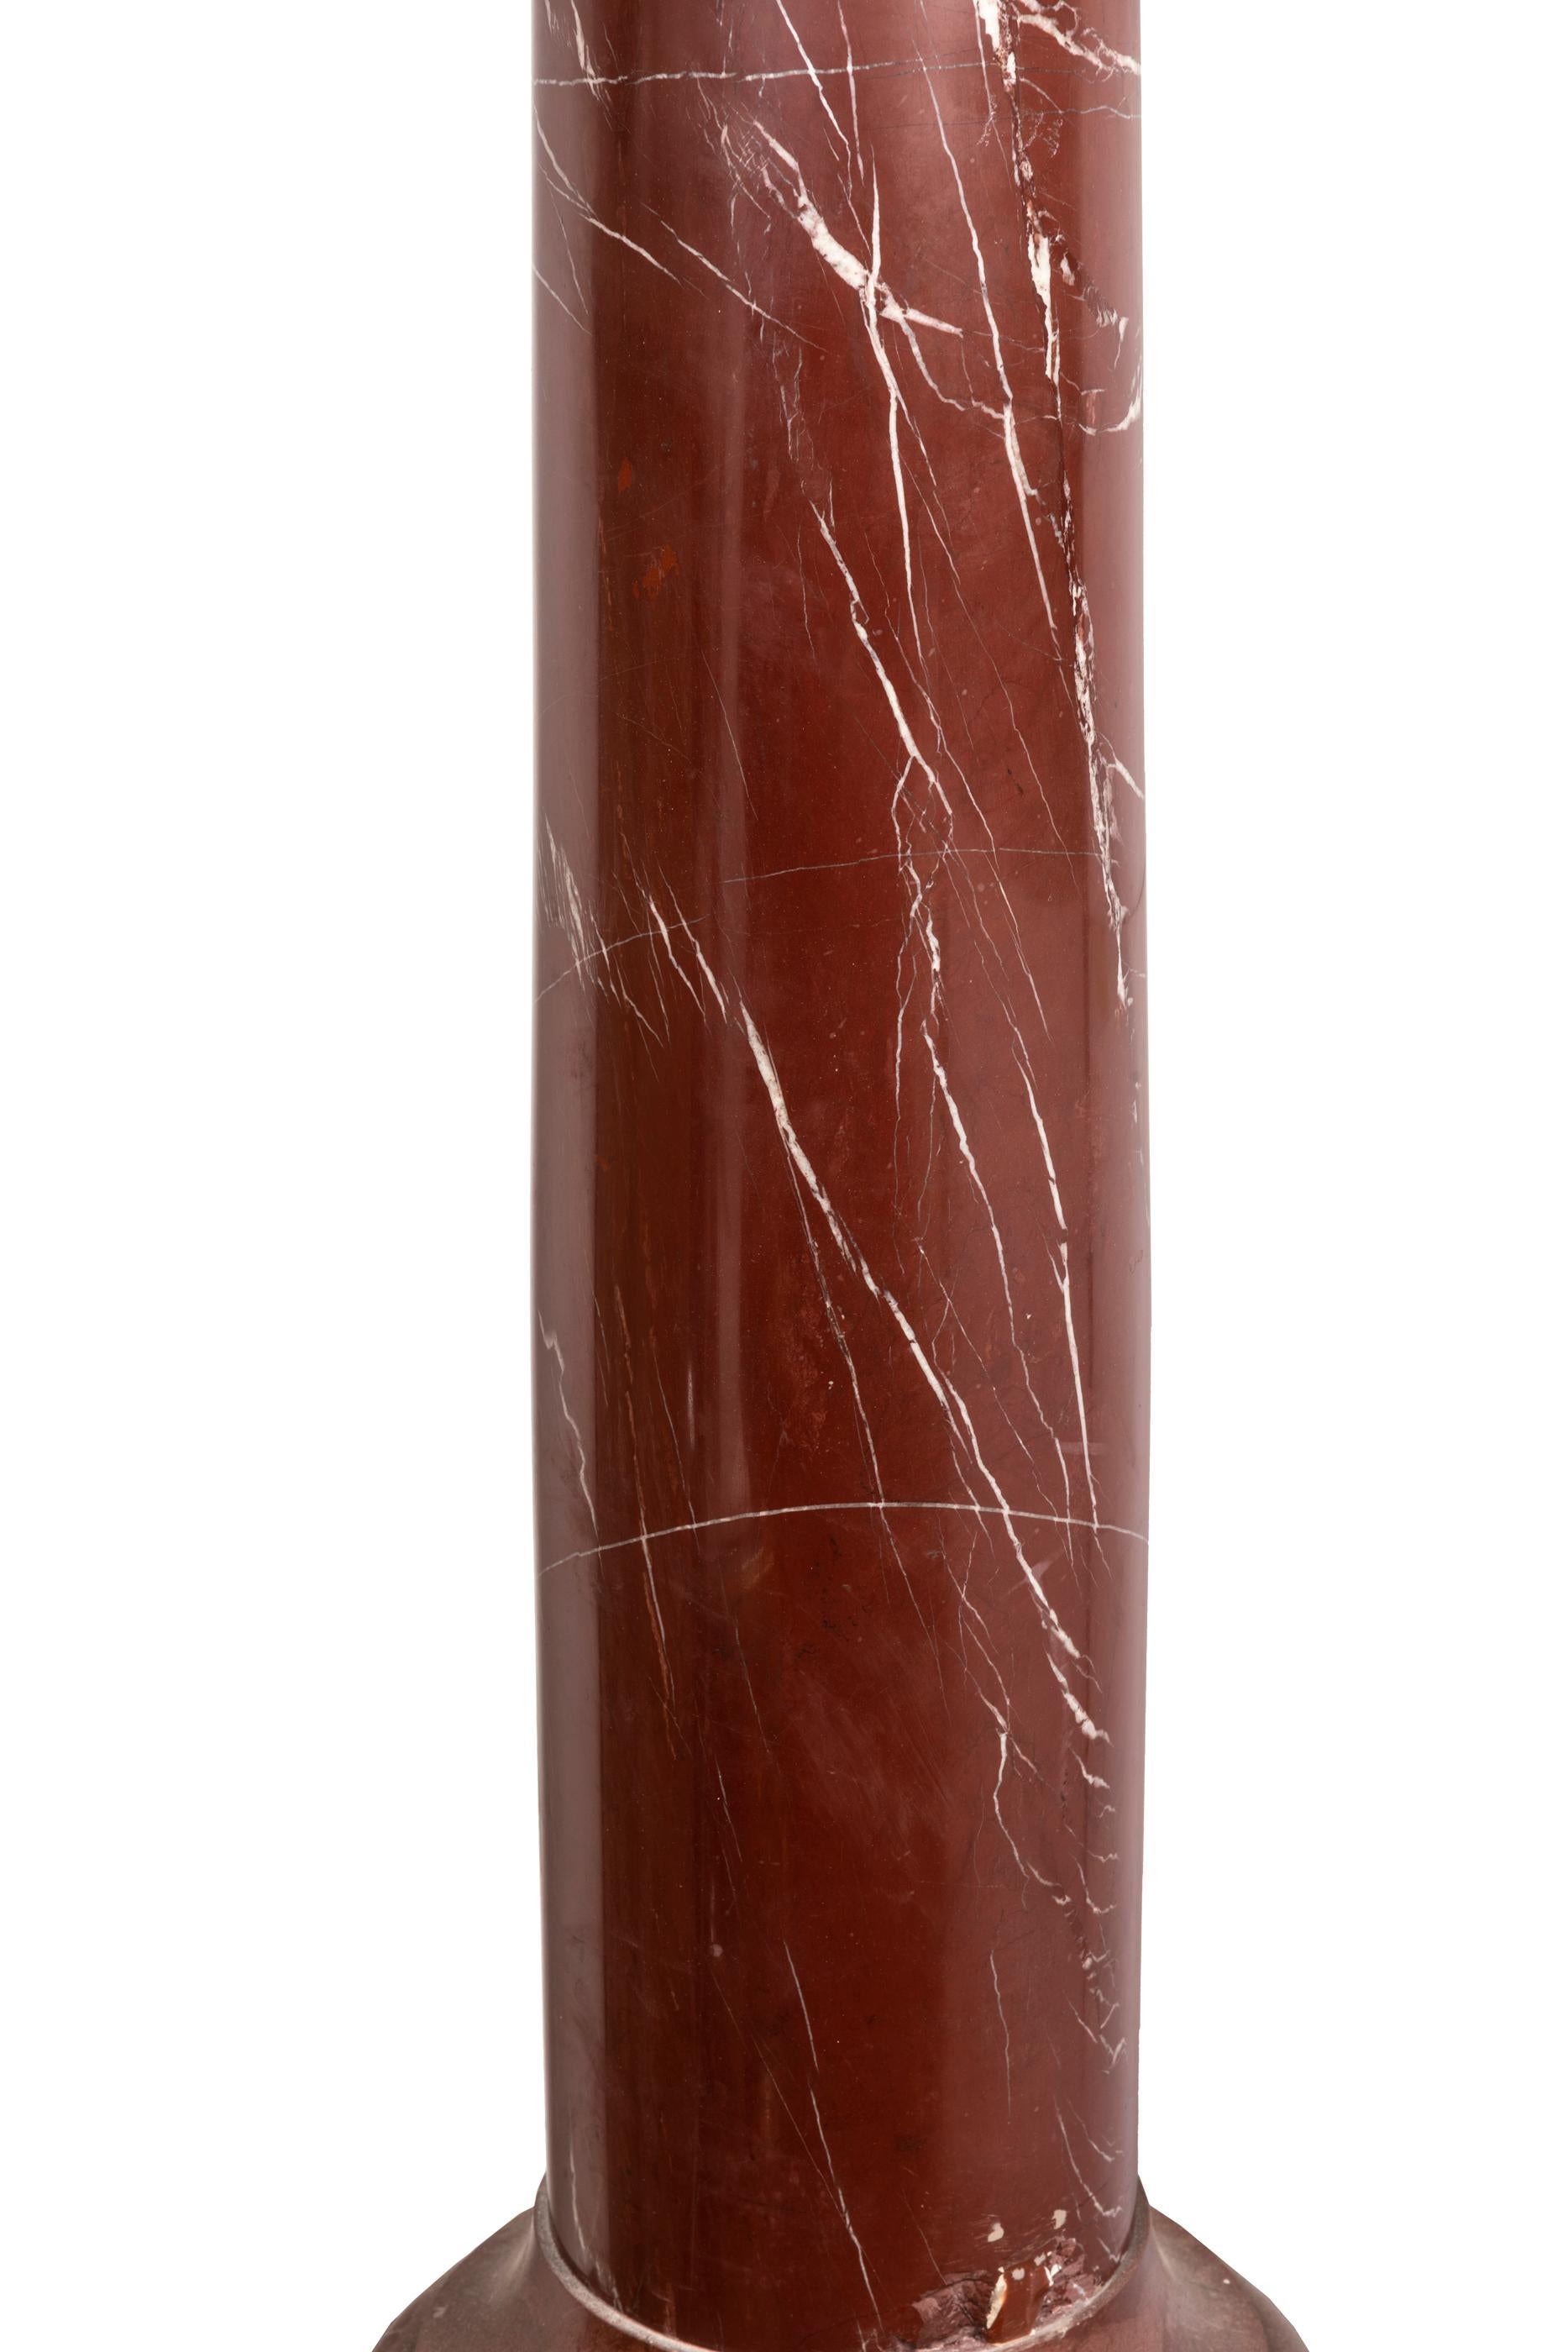 Superb Pair of Red Griotte Marble Columns, Pedestals, 20th Century, France In Good Condition For Sale In Saint-Ouen, FR